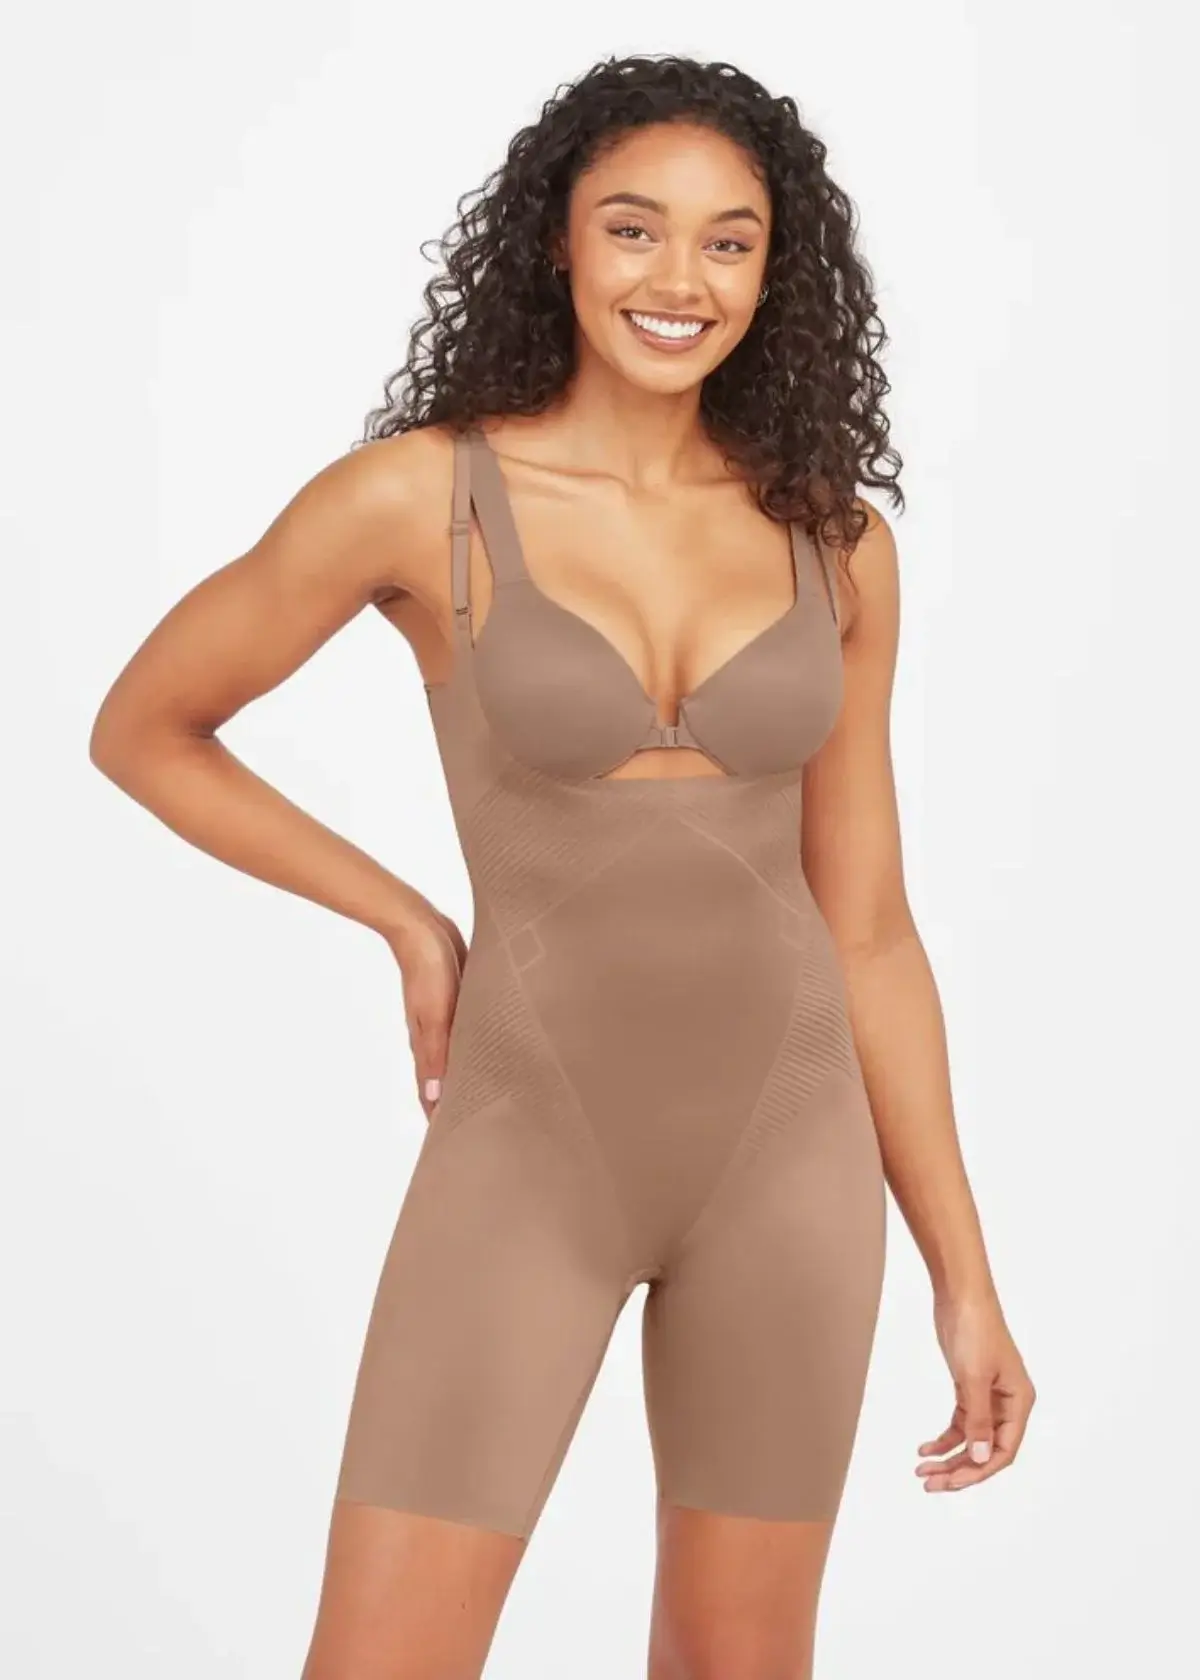 How to choose the right body shaper for women?